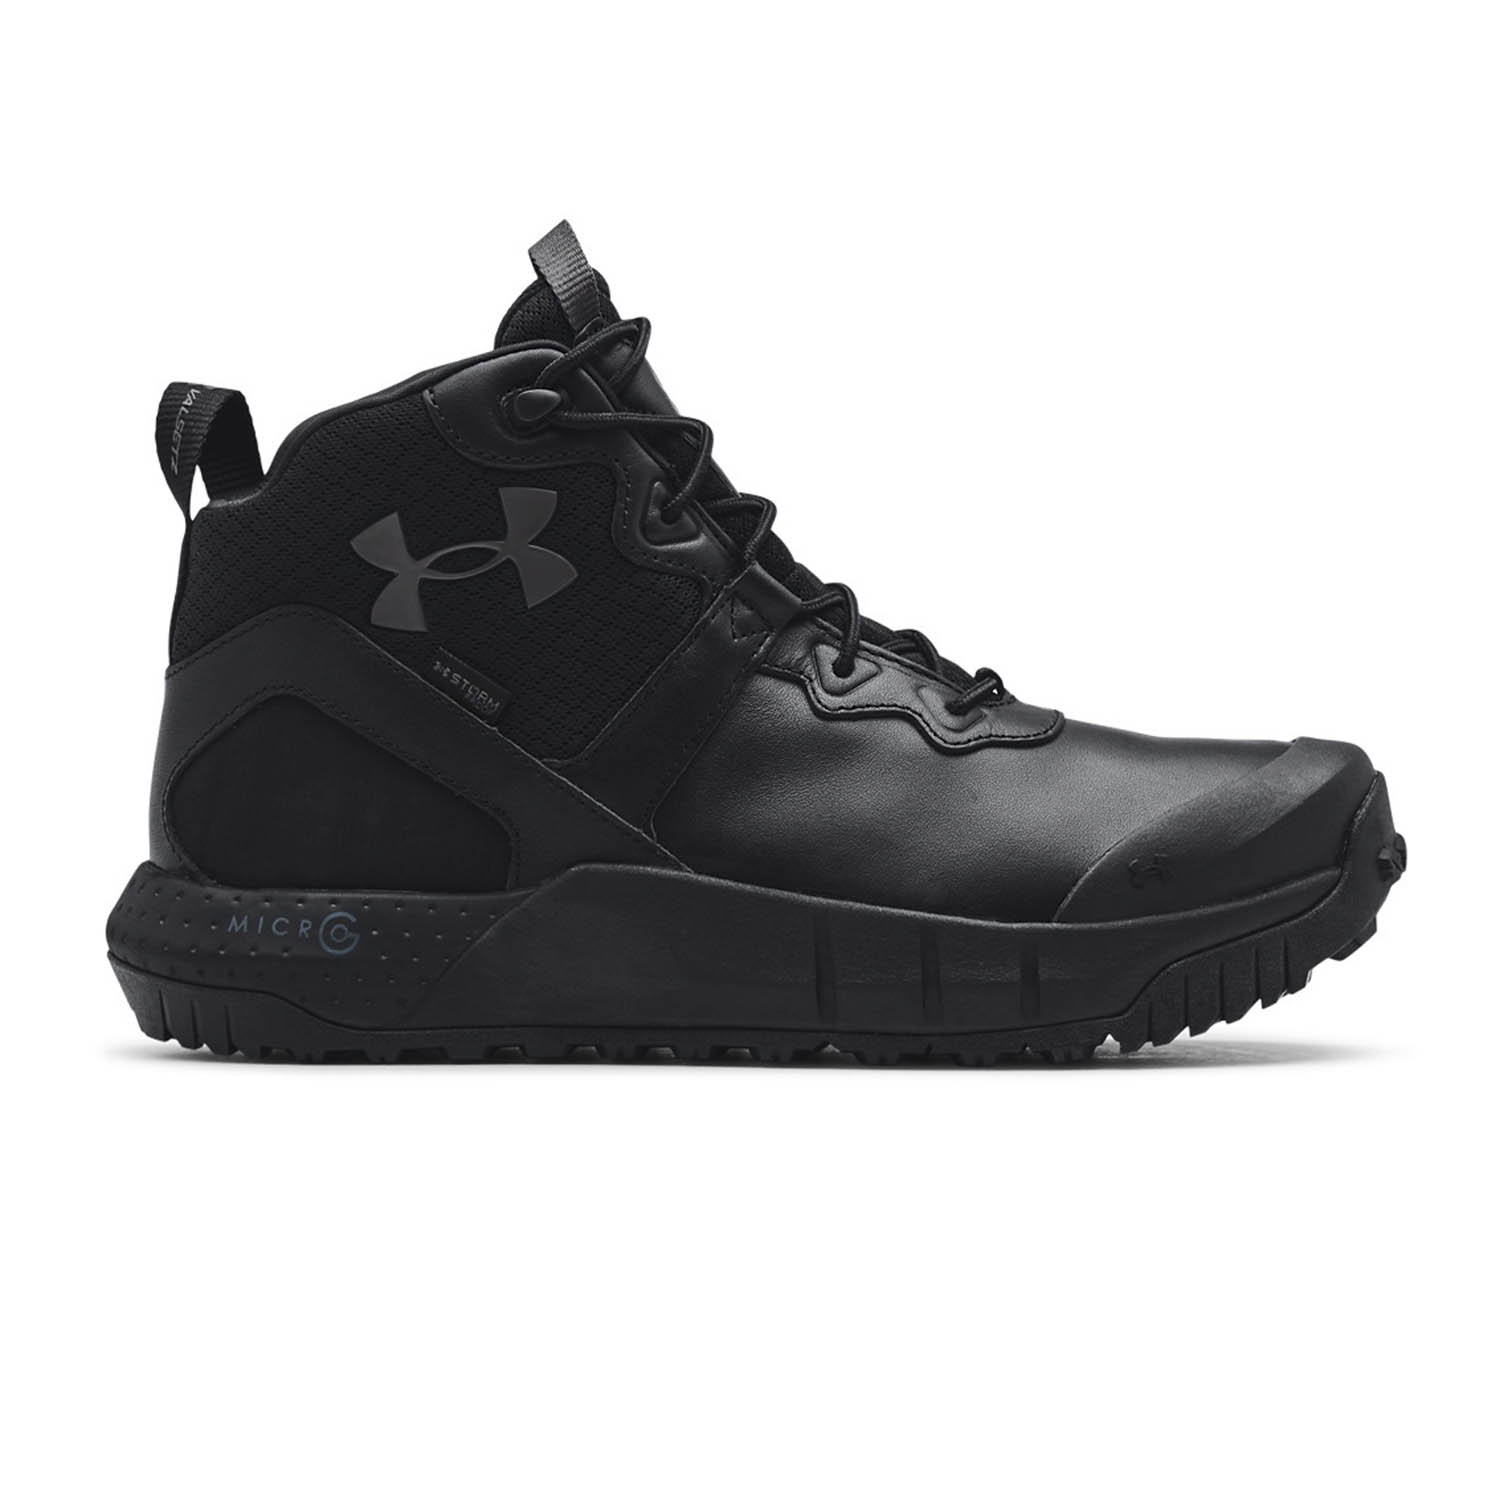 UNDER ARMOUR MICRO G VALSETZ MID LEATHER WATERPROOF TAC BOOT